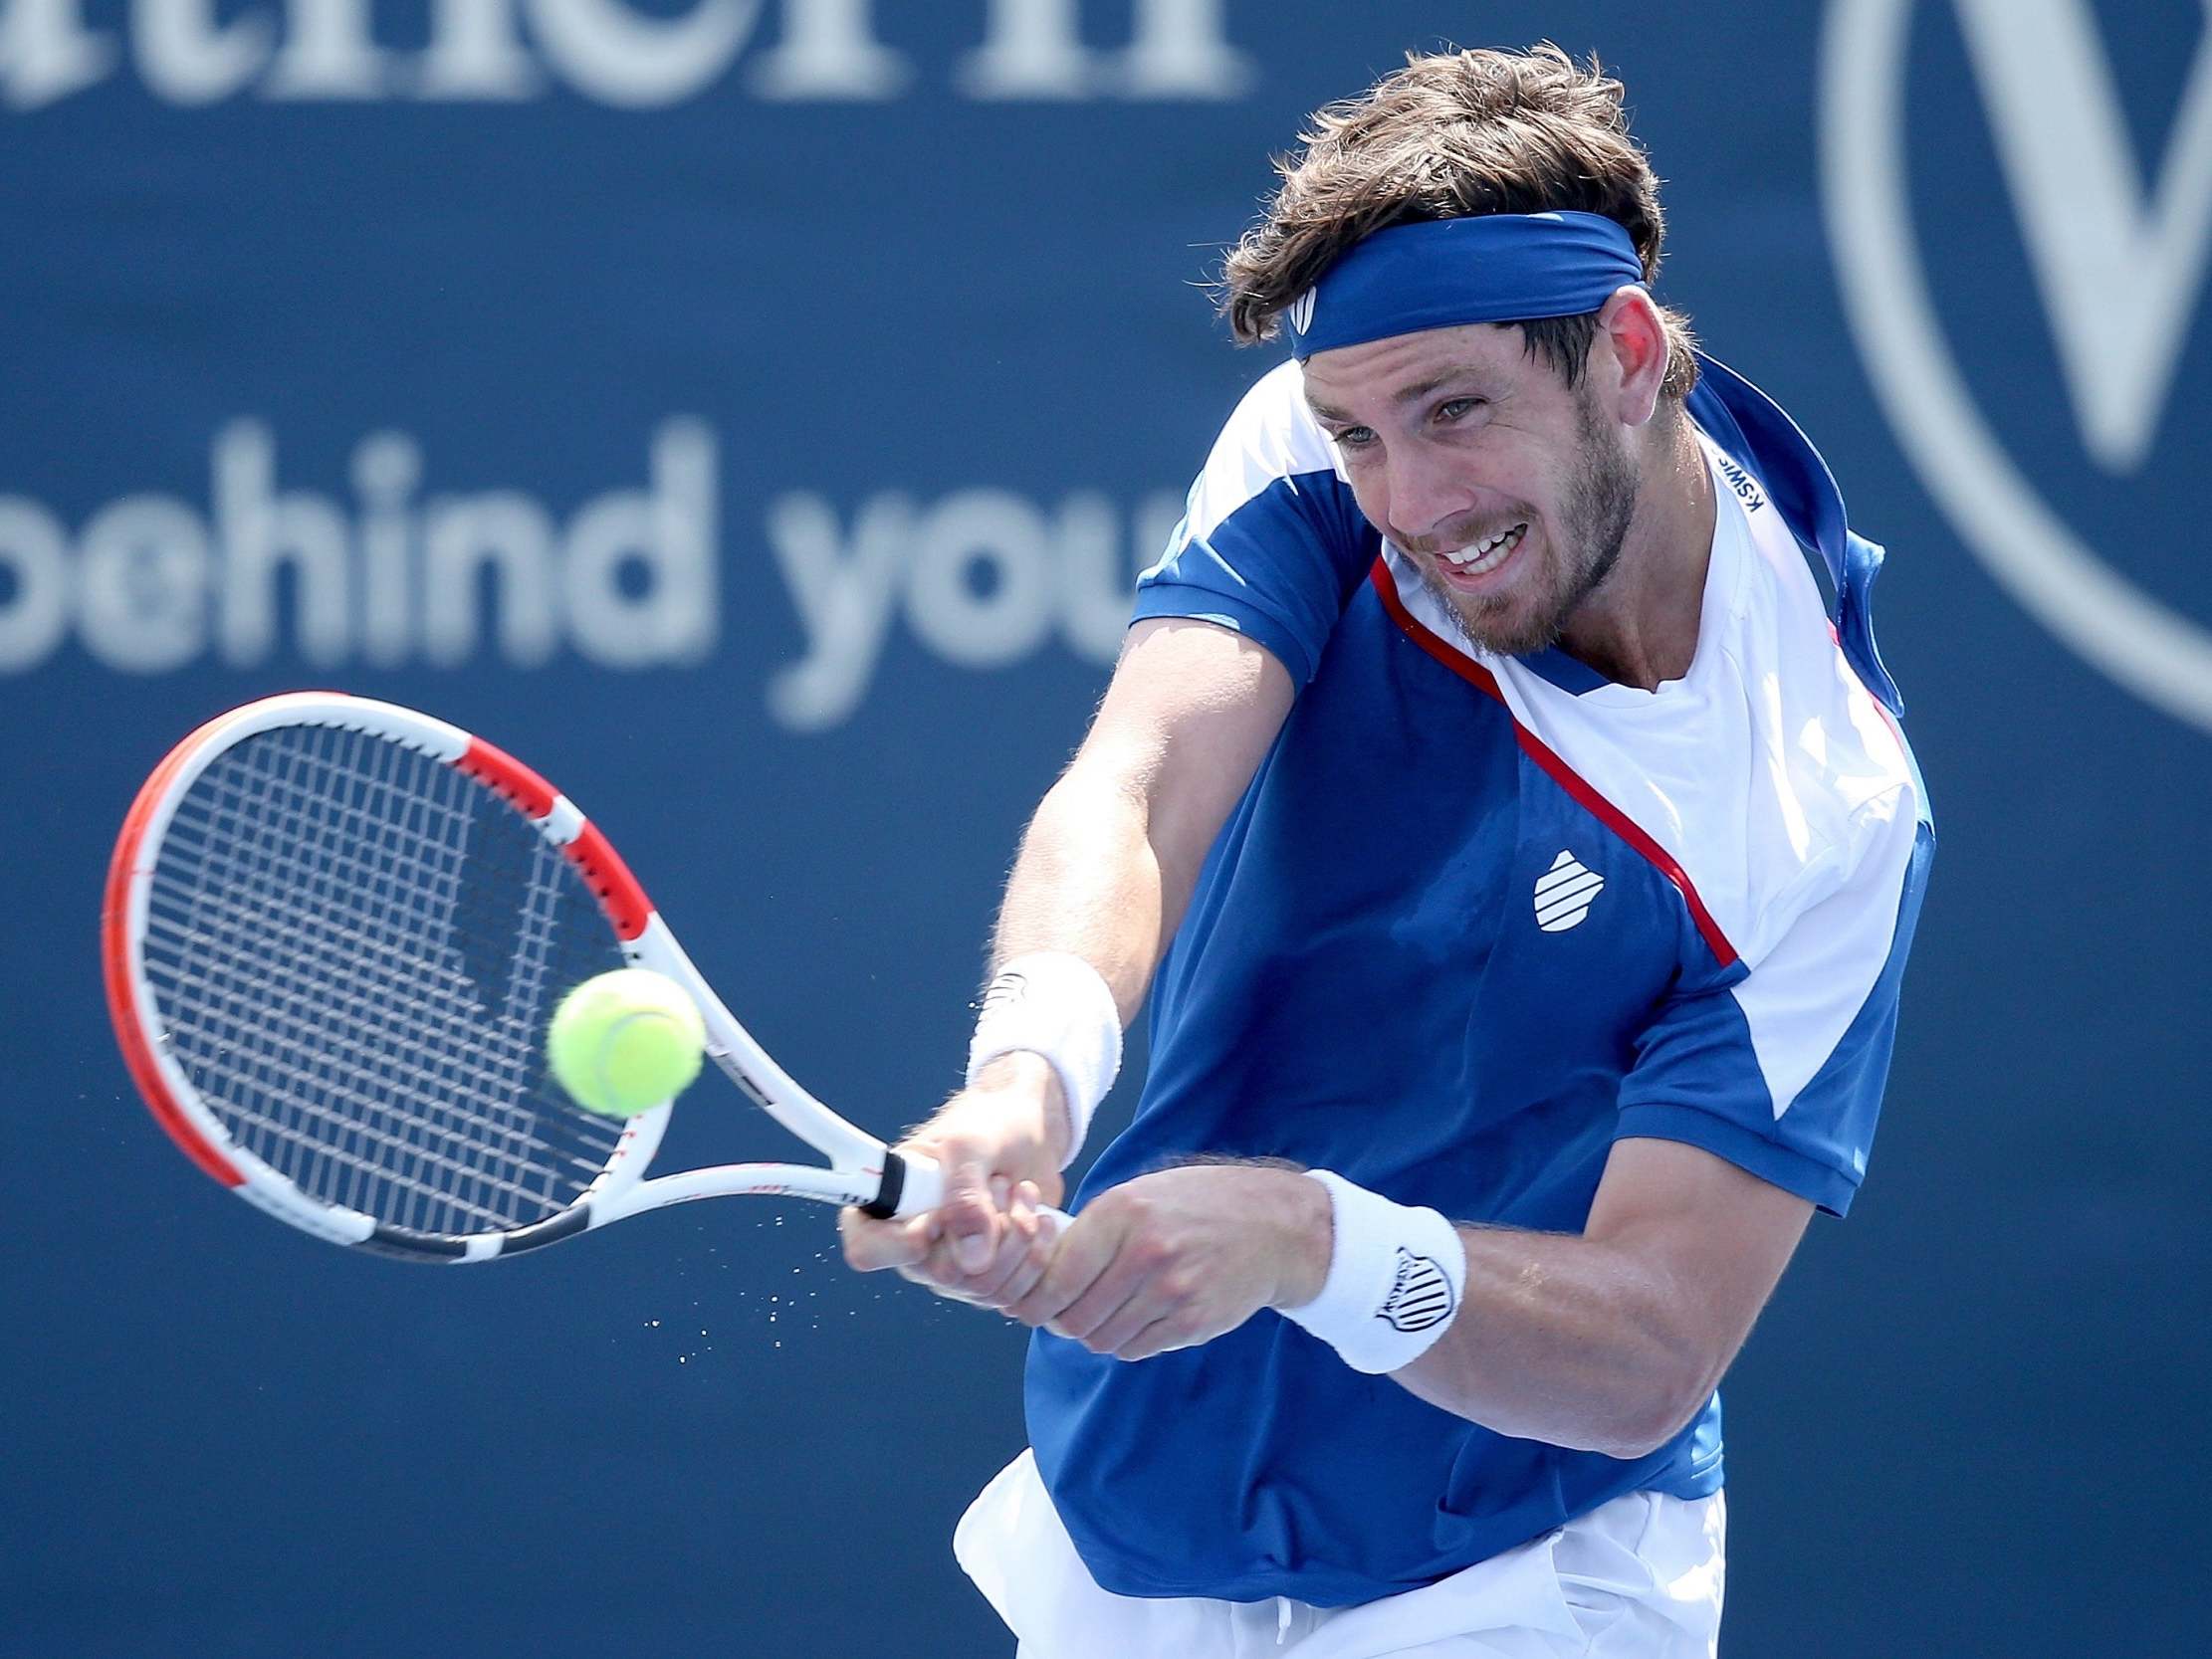 Cameron Norrie produced a shock win over ninth seed Diego Schwartzman